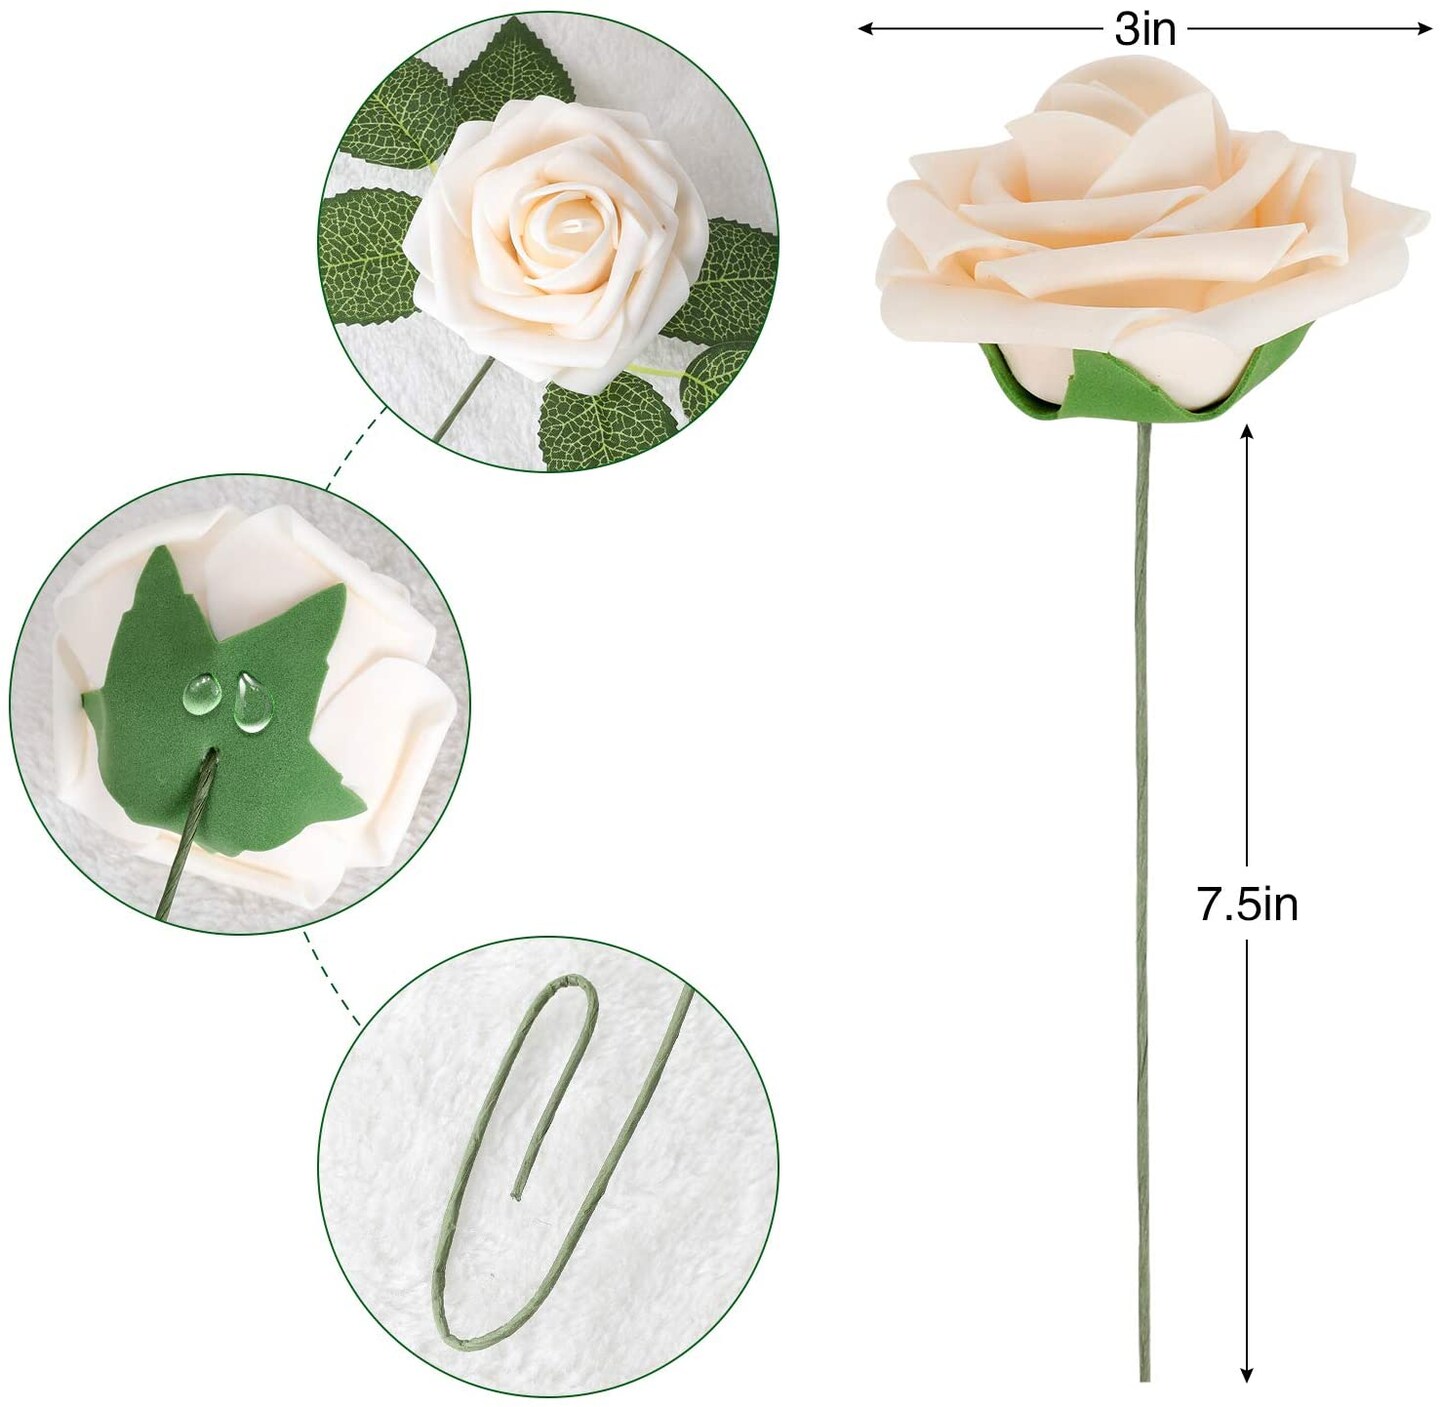 25pcs Fake Cream White Roses Artificial Rose Heads with Stems Lifelike Foam Flowers DIY Wedding Bouquets Wedding Party Decor